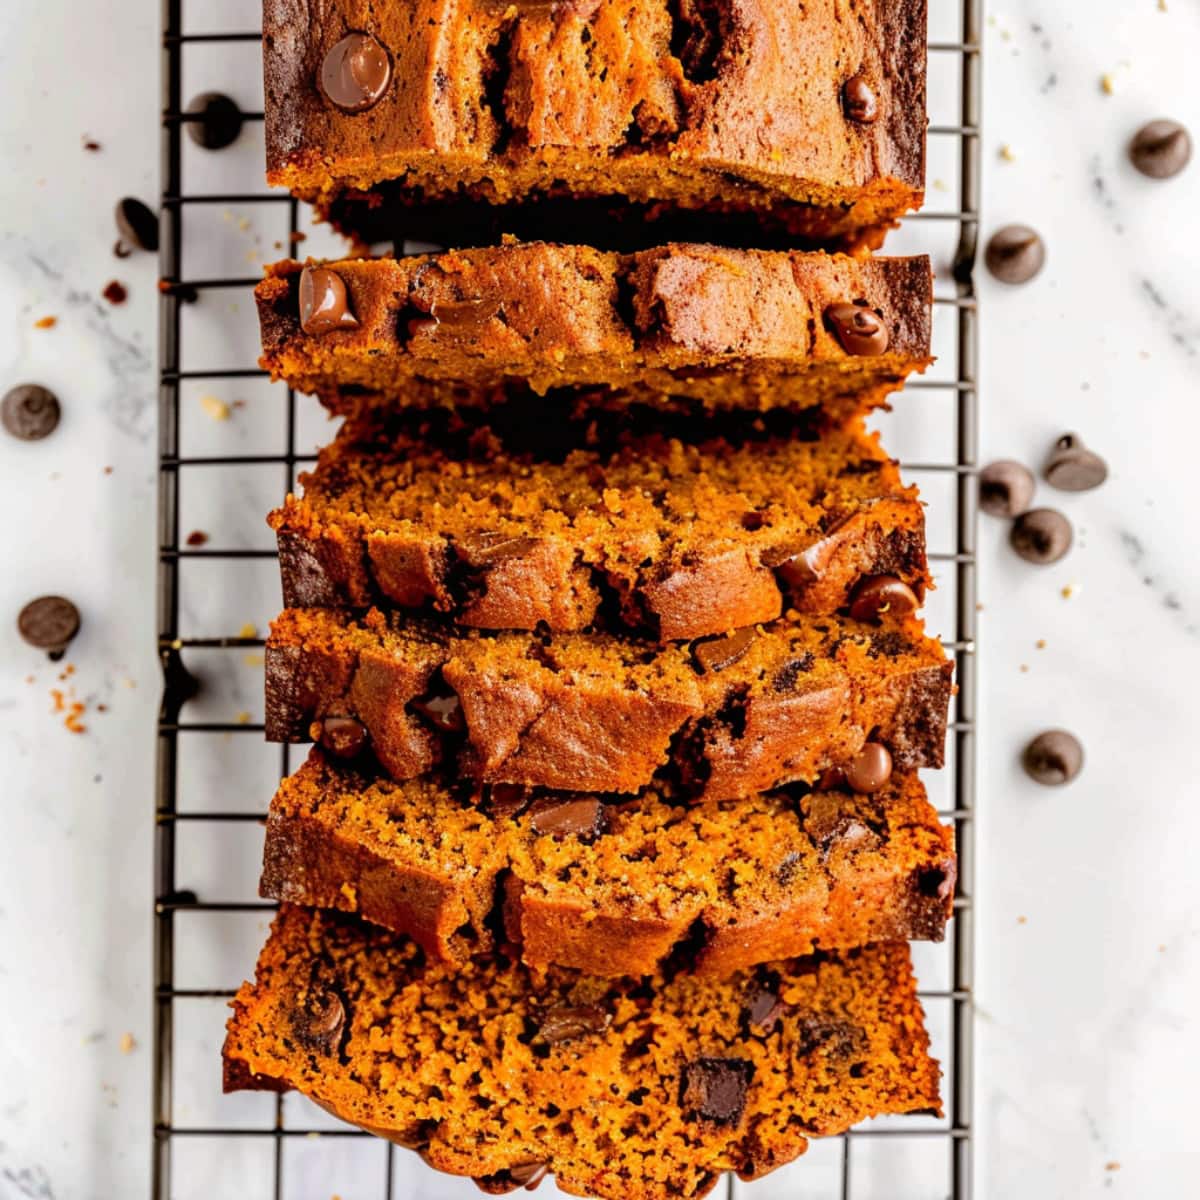 Slices of Pumpkin Chocolate Chip Bread on a Wire Rack on a White Marble Table